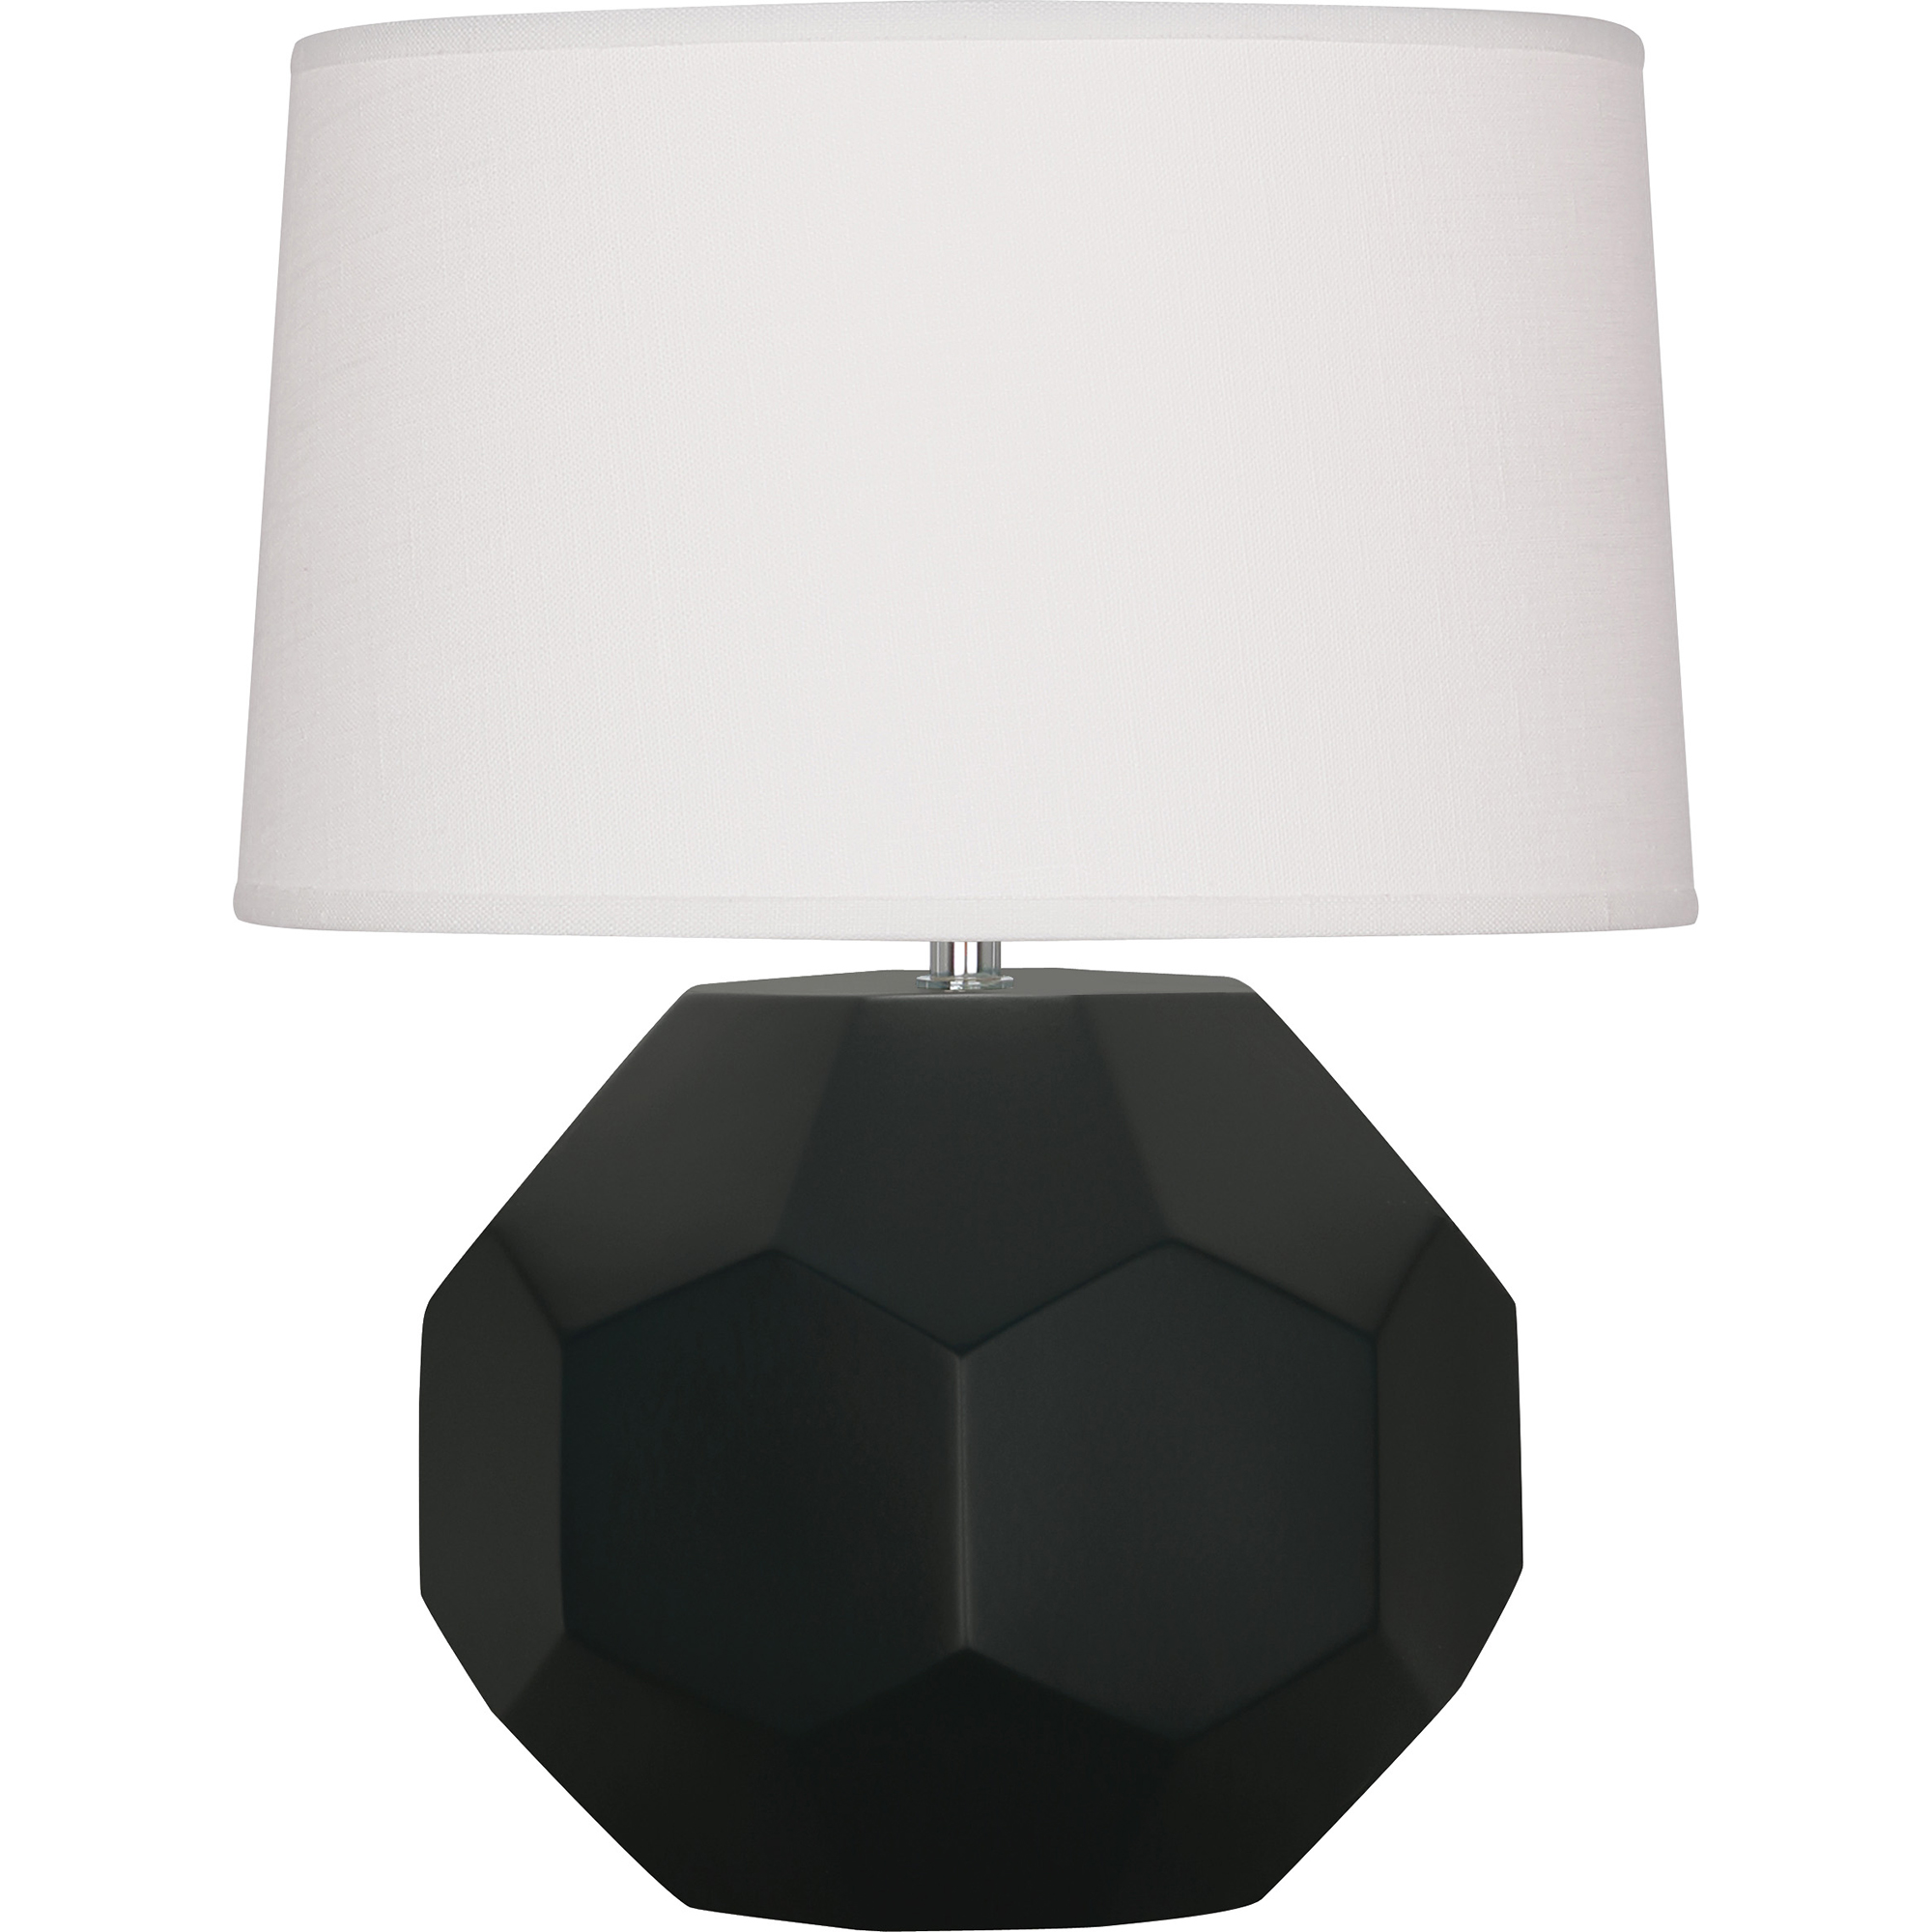 Franklin Table Lamp Style #MOS01